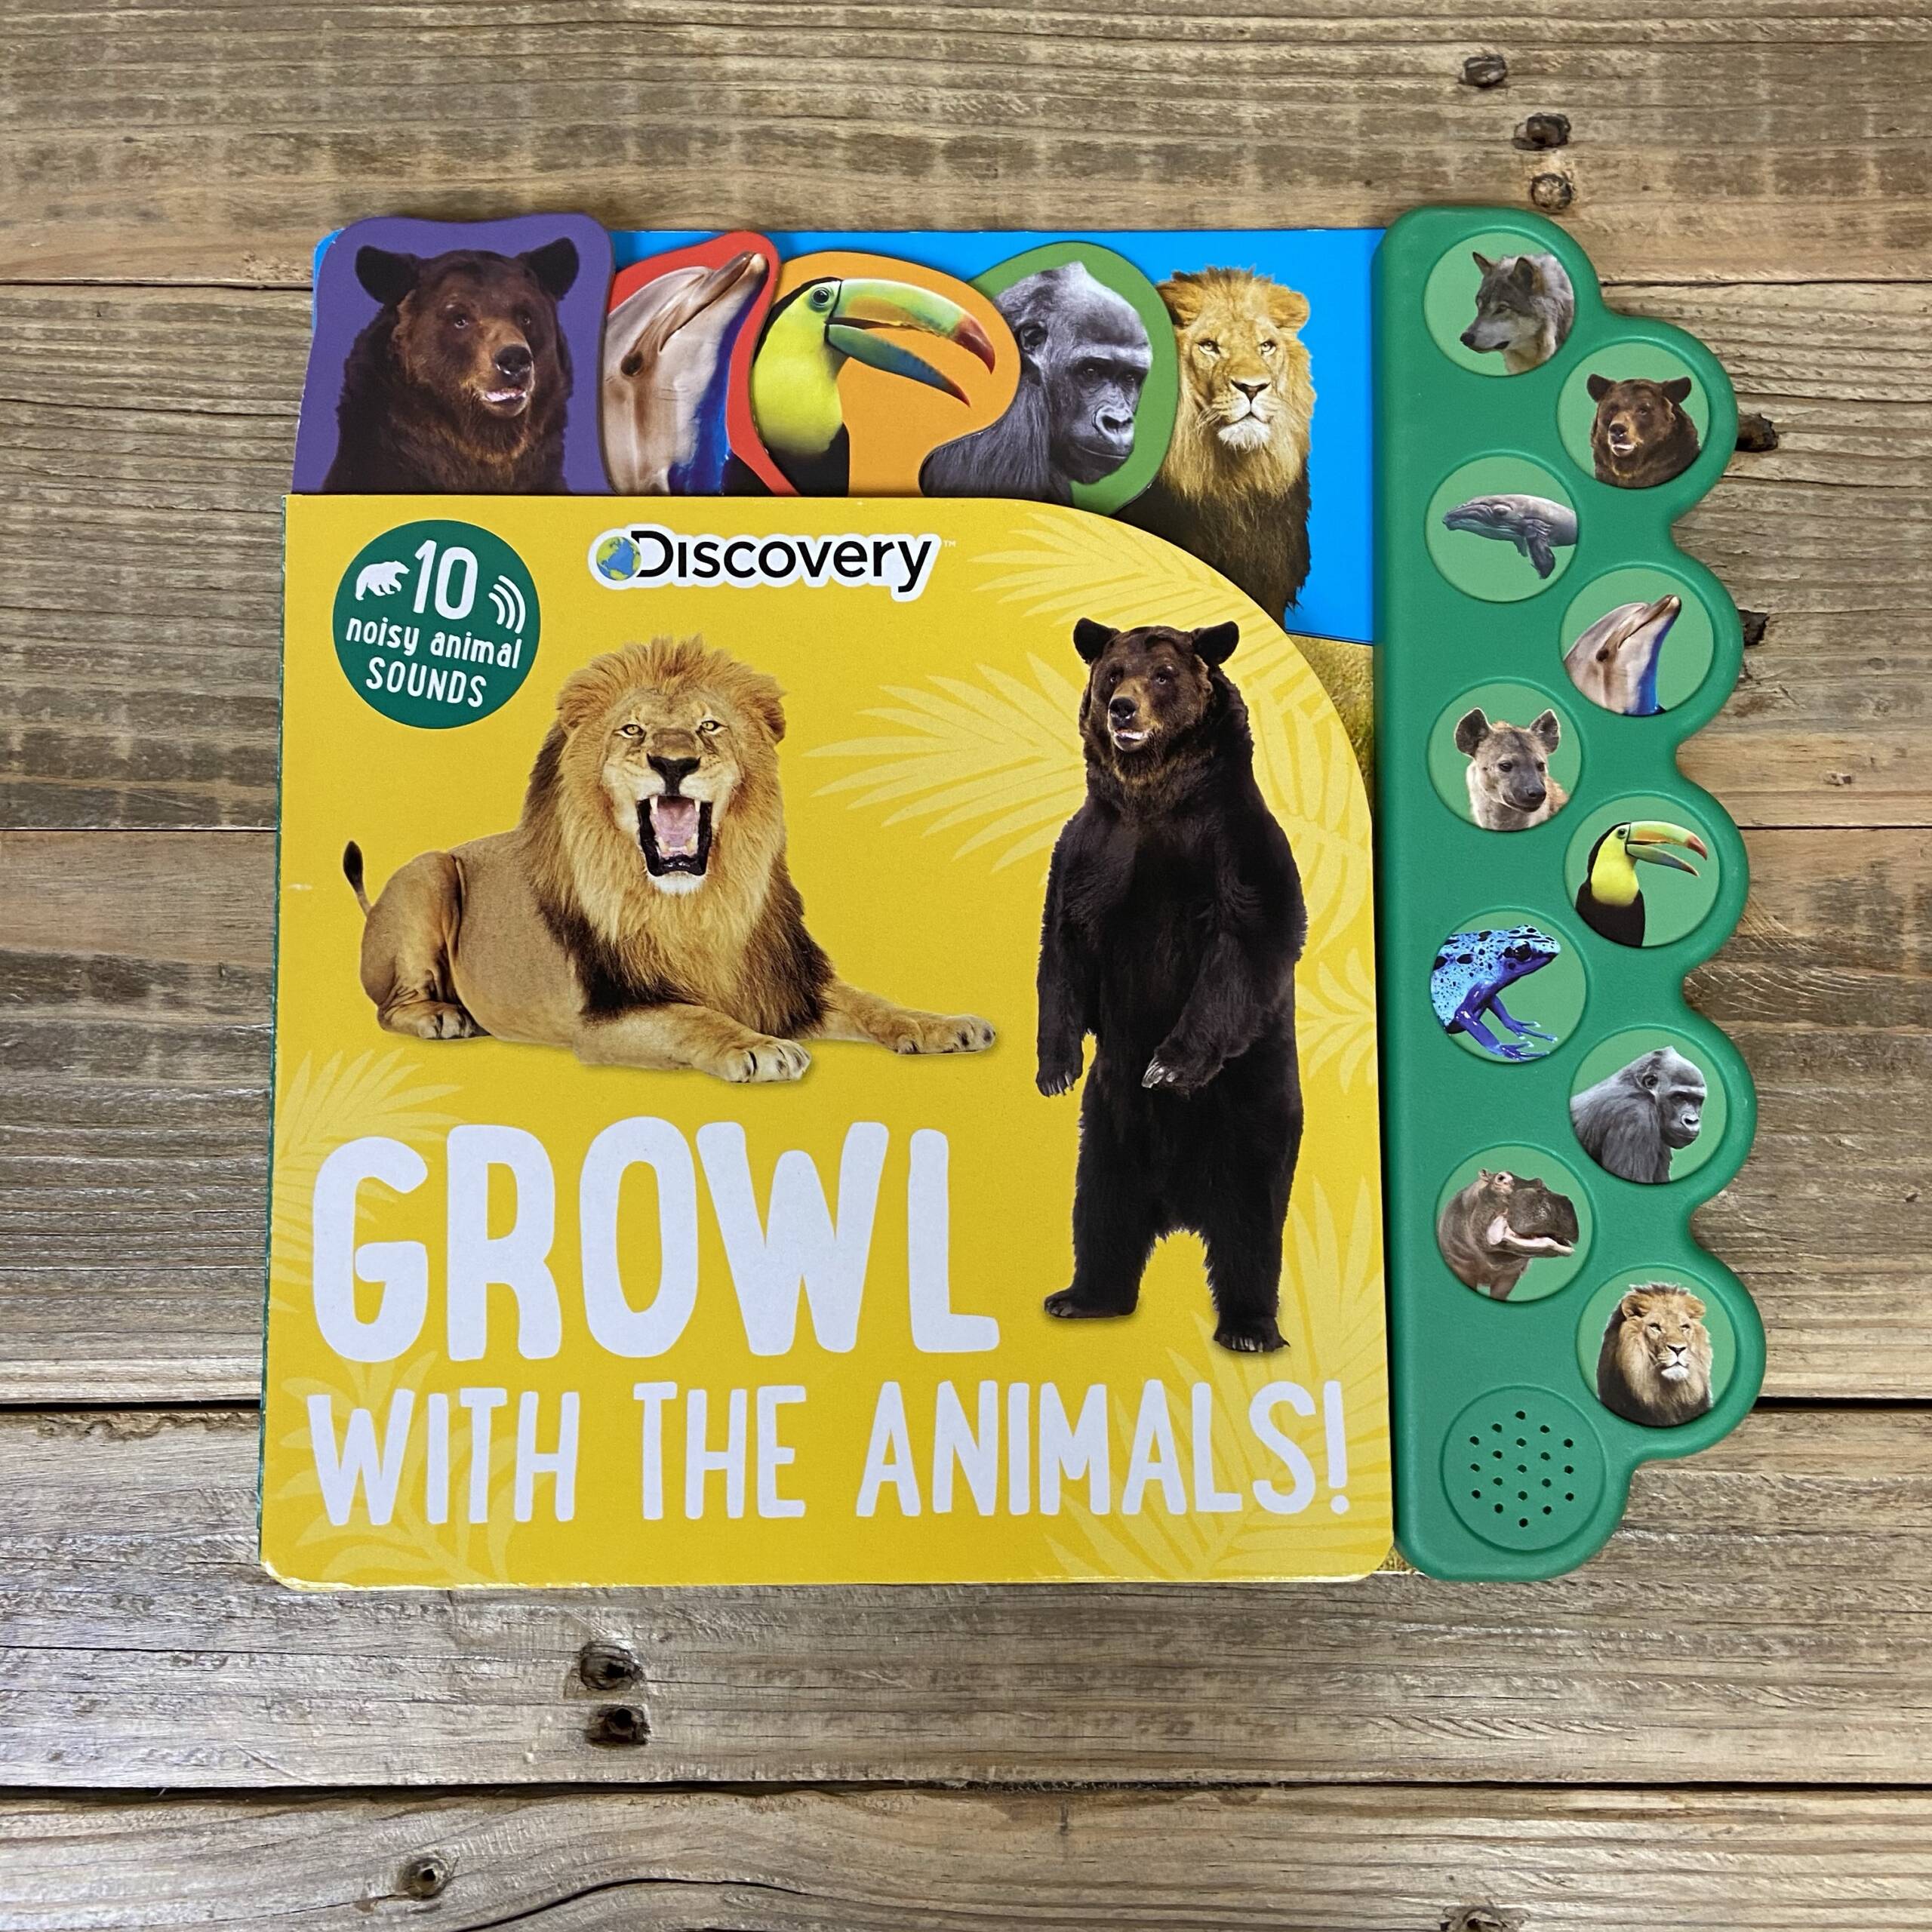 Discovery: Growl with the Animals! ( 10-Button Sound Books ) – Faith & Life